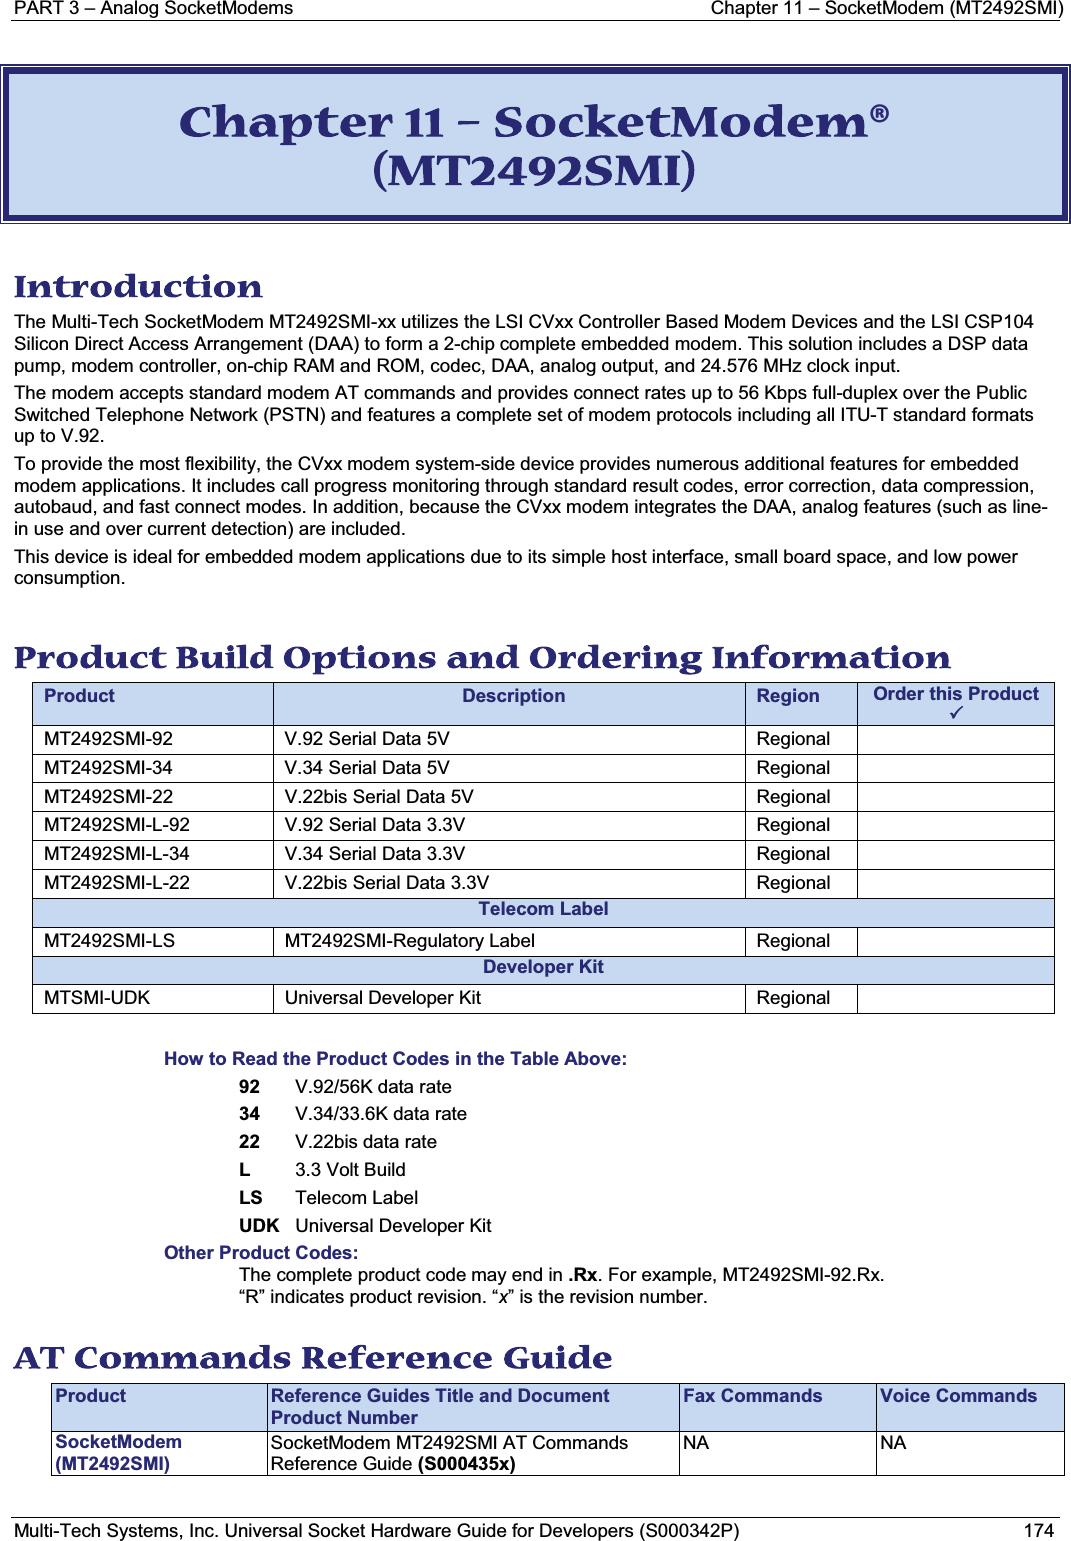 PART 3 – Analog SocketModems  Chapter 11 – SocketModem (MT2492SMI)Multi-Tech Systems, Inc. Universal Socket Hardware Guide for Developers (S000342P) 174CChapter 11 – SocketModem® (MT2492SMI) Introduction The Multi-Tech SocketModem MT2492SMI-xx utilizes the LSI CVxx Controller Based Modem Devices and the LSI CSP104 Silicon Direct Access Arrangement (DAA) to form a 2-chip complete embedded modem. This solution includes a DSP data pump, modem controller, on-chip RAM and ROM, codec, DAA, analog output, and 24.576 MHz clock input. The modem accepts standard modem AT commands and provides connect rates up to 56 Kbps full-duplex over the Public Switched Telephone Network (PSTN) and features a complete set of modem protocols including all ITU-T standard formats up to V.92. To provide the most flexibility, the CVxx modem system-side device provides numerous additional features for embedded modem applications. It includes call progress monitoring through standard result codes, error correction, data compression, autobaud, and fast connect modes. In addition, because the CVxx modem integrates the DAA, analog features (such as line-in use and over current detection) are included. This device is ideal for embedded modem applications due to its simple host interface, small board space, and low power consumption. Product Build Options and Ordering Information Product Description Region Order this Product 3MT2492SMI-92 V.92 Serial Data 5V  RegionalMT2492SMI-34 V.34 Serial Data 5V  RegionalMT2492SMI-22 V.22bis Serial Data 5V  RegionalMT2492SMI-L-92 V.92 Serial Data 3.3V RegionalMT2492SMI-L-34 V.34 Serial Data 3.3V RegionalMT2492SMI-L-22 V.22bis Serial Data 3.3V RegionalTelecom LabelMT2492SMI-LS MT2492SMI-Regulatory Label RegionalDeveloper KitMTSMI-UDK Universal Developer Kit RegionalHow to Read the Product Codes in the Table Above:92 V.92/56K data rate34 V.34/33.6K data rate22 V.22bis data rateL3.3 Volt BuildLS Telecom LabelUDK Universal Developer KitOther Product Codes:The complete product code may end in .Rx. For example, MT2492SMI-92.Rx.“R” indicates product revision. “x” is the revision number.AT Commands Reference Guide Product Reference Guides Title and Document Product NumberFax Commands Voice CommandsSocketModem(MT2492SMI)SocketModem MT2492SMI AT Commands Reference Guide (S000435x) NA NA